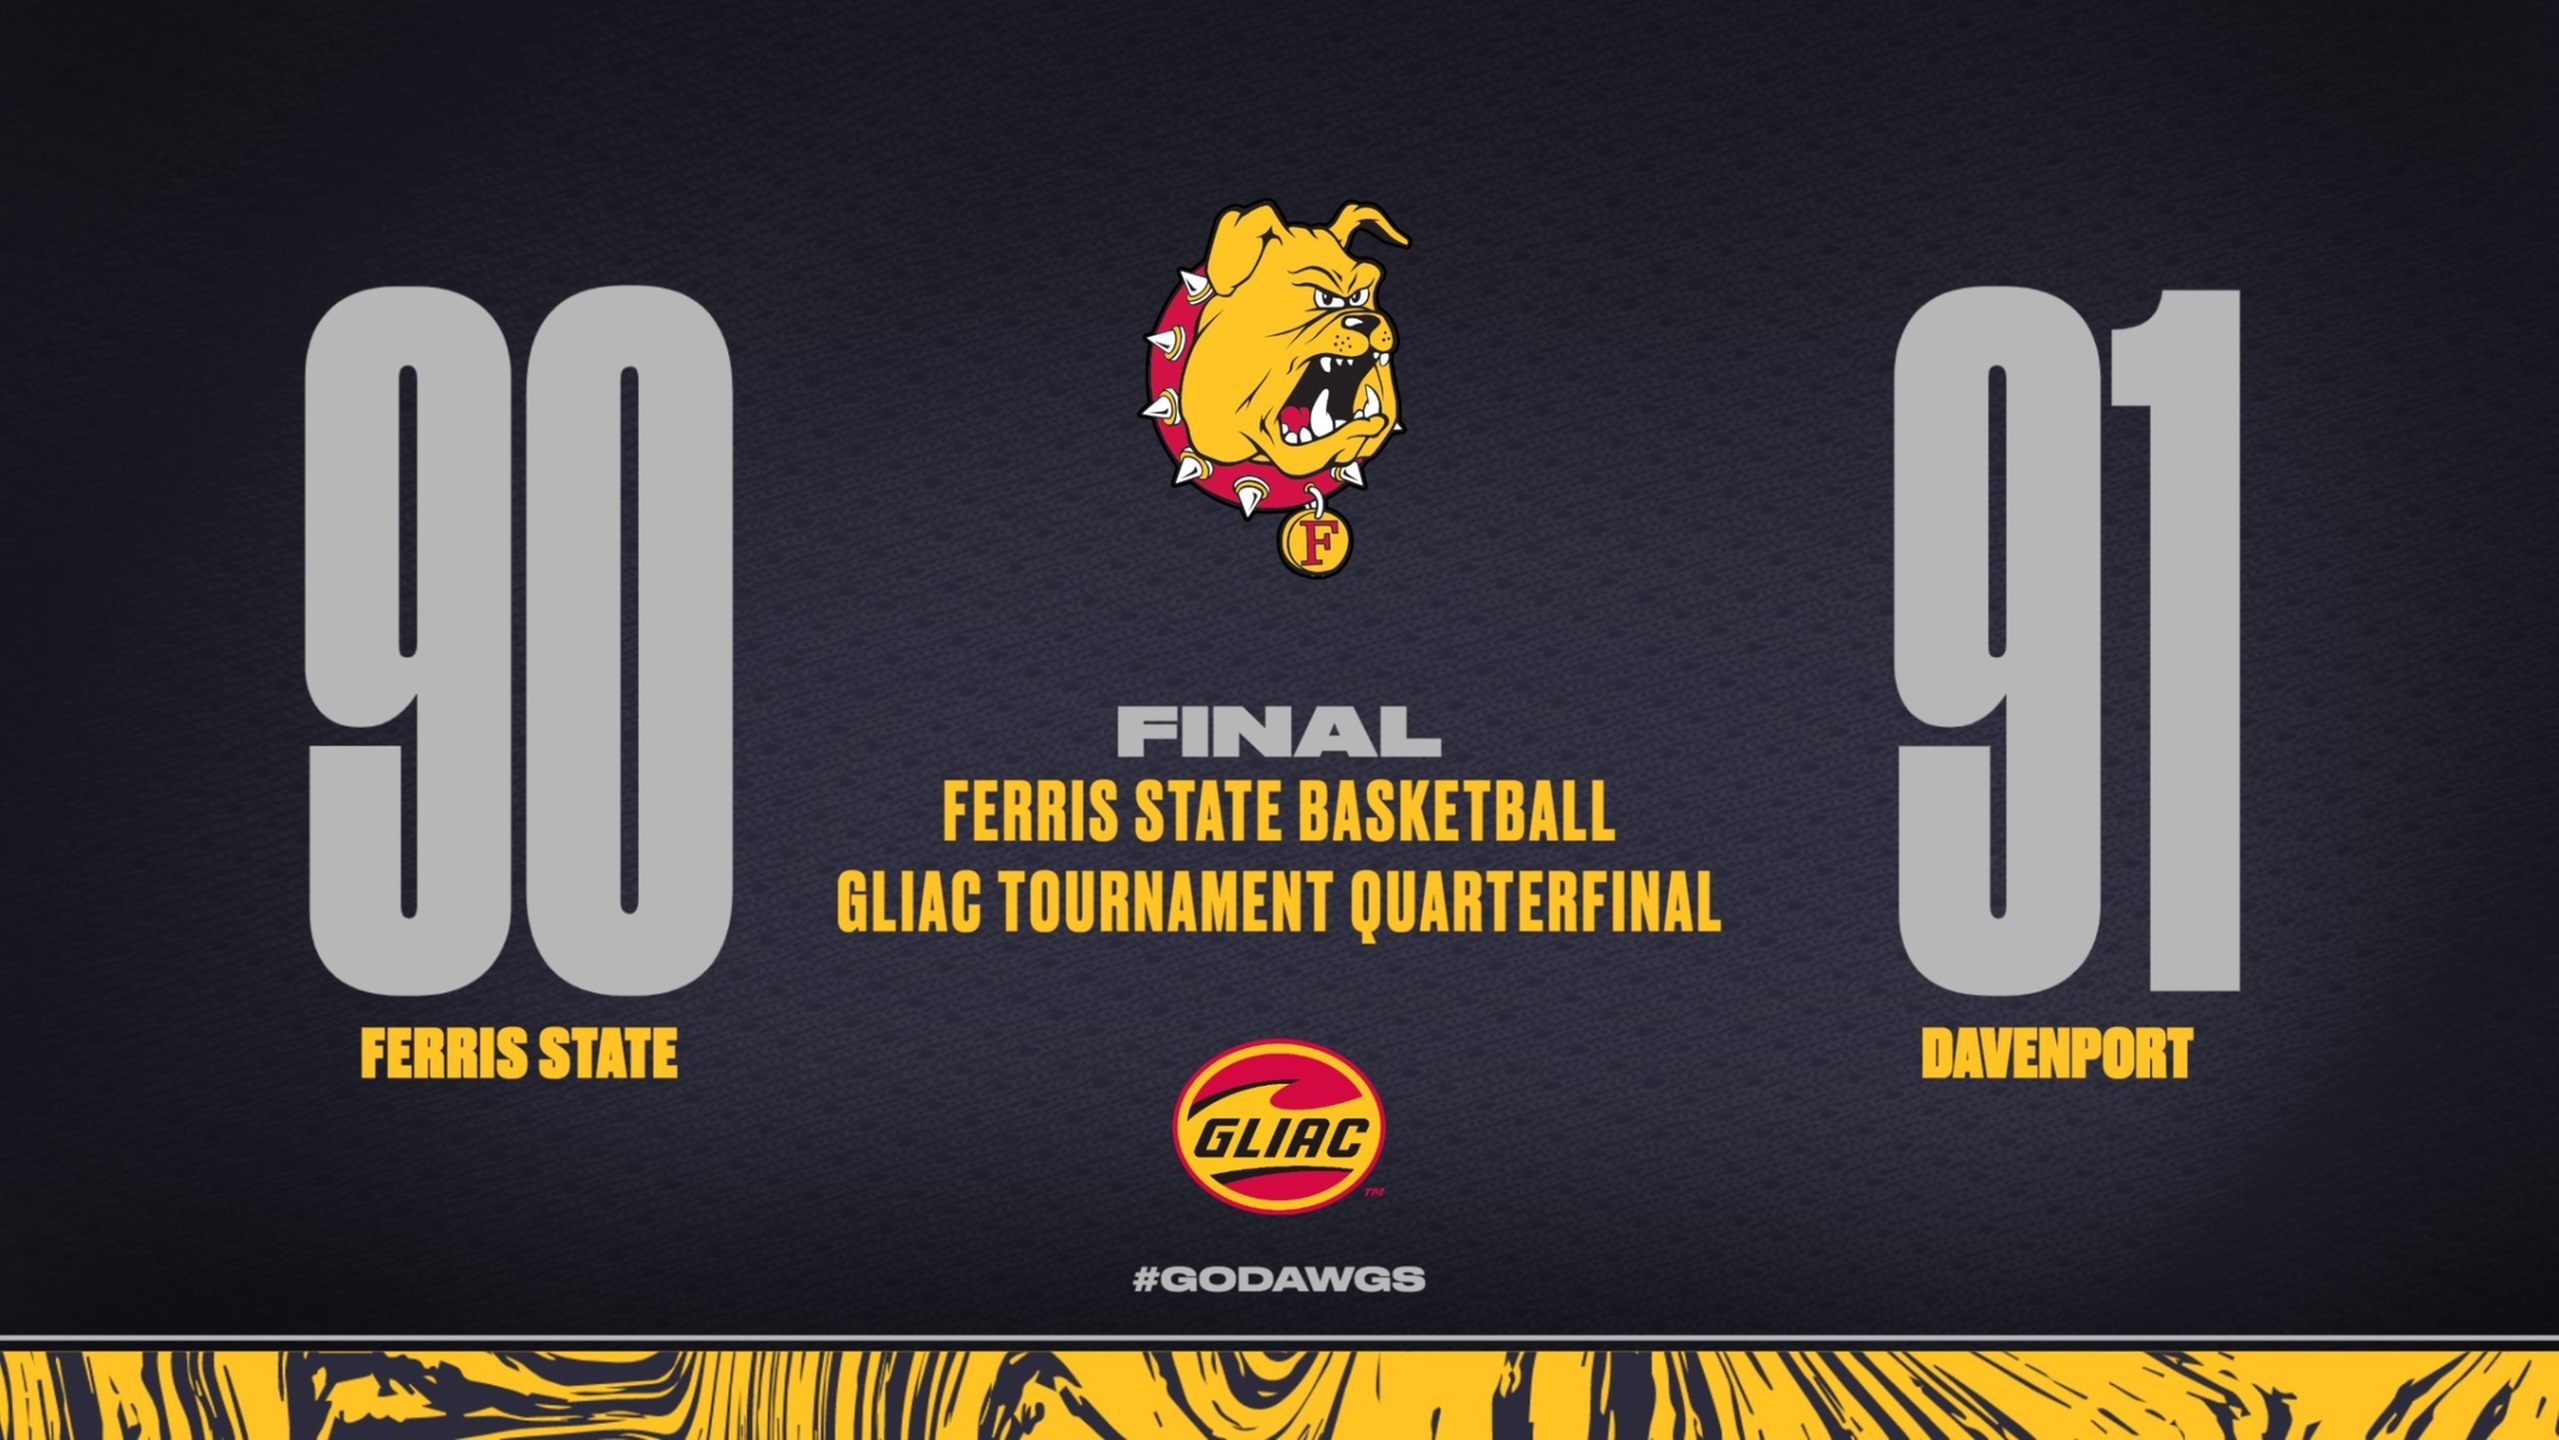 Ferris State Falls In GLIAC Quarterfinals And Now Awaits NCAA Selection Show On Sunday Evening